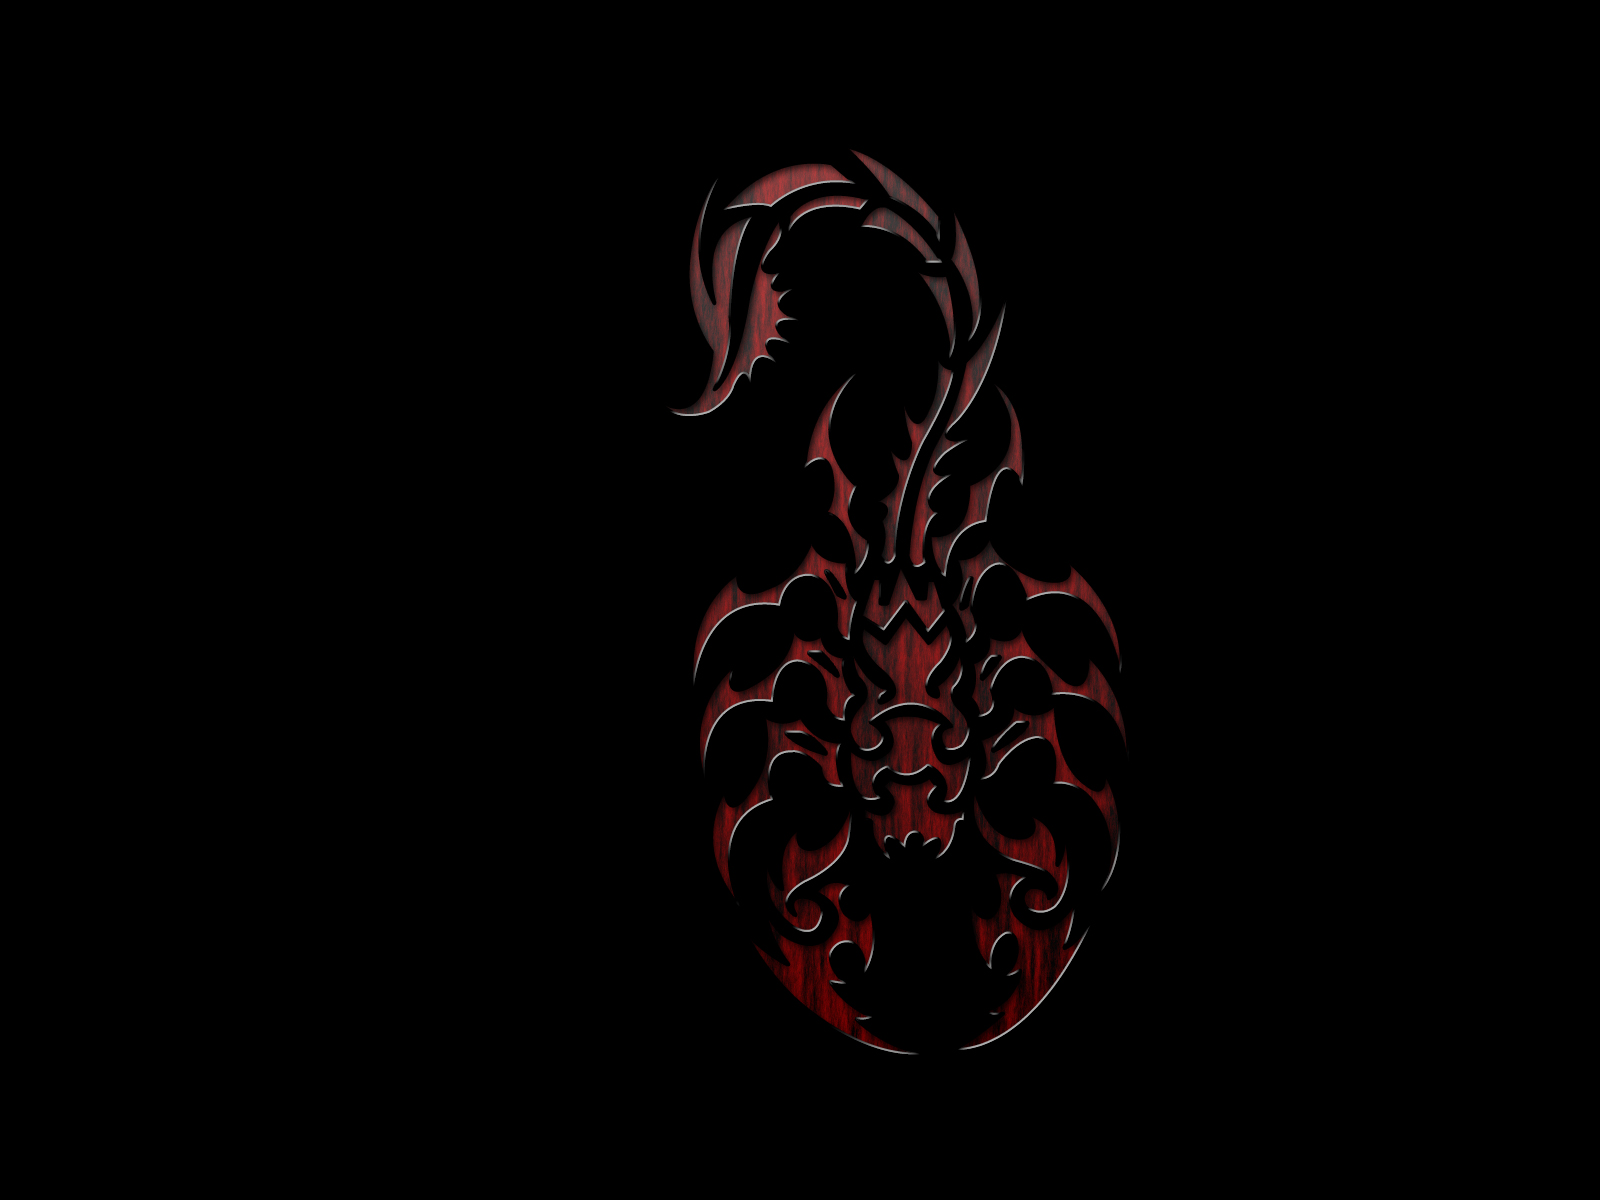 Free download Scorpion Abstract Wallpaper Android Bhstormcom [1600x1200] for your Desktop, Mobile & Tablet. Explore Scorpion Wallpaper. Scorpion Wallpaper HD, Mortal Kombat Scorpion Wallpaper HD, Scorpion and Sub Zero Wallpaper